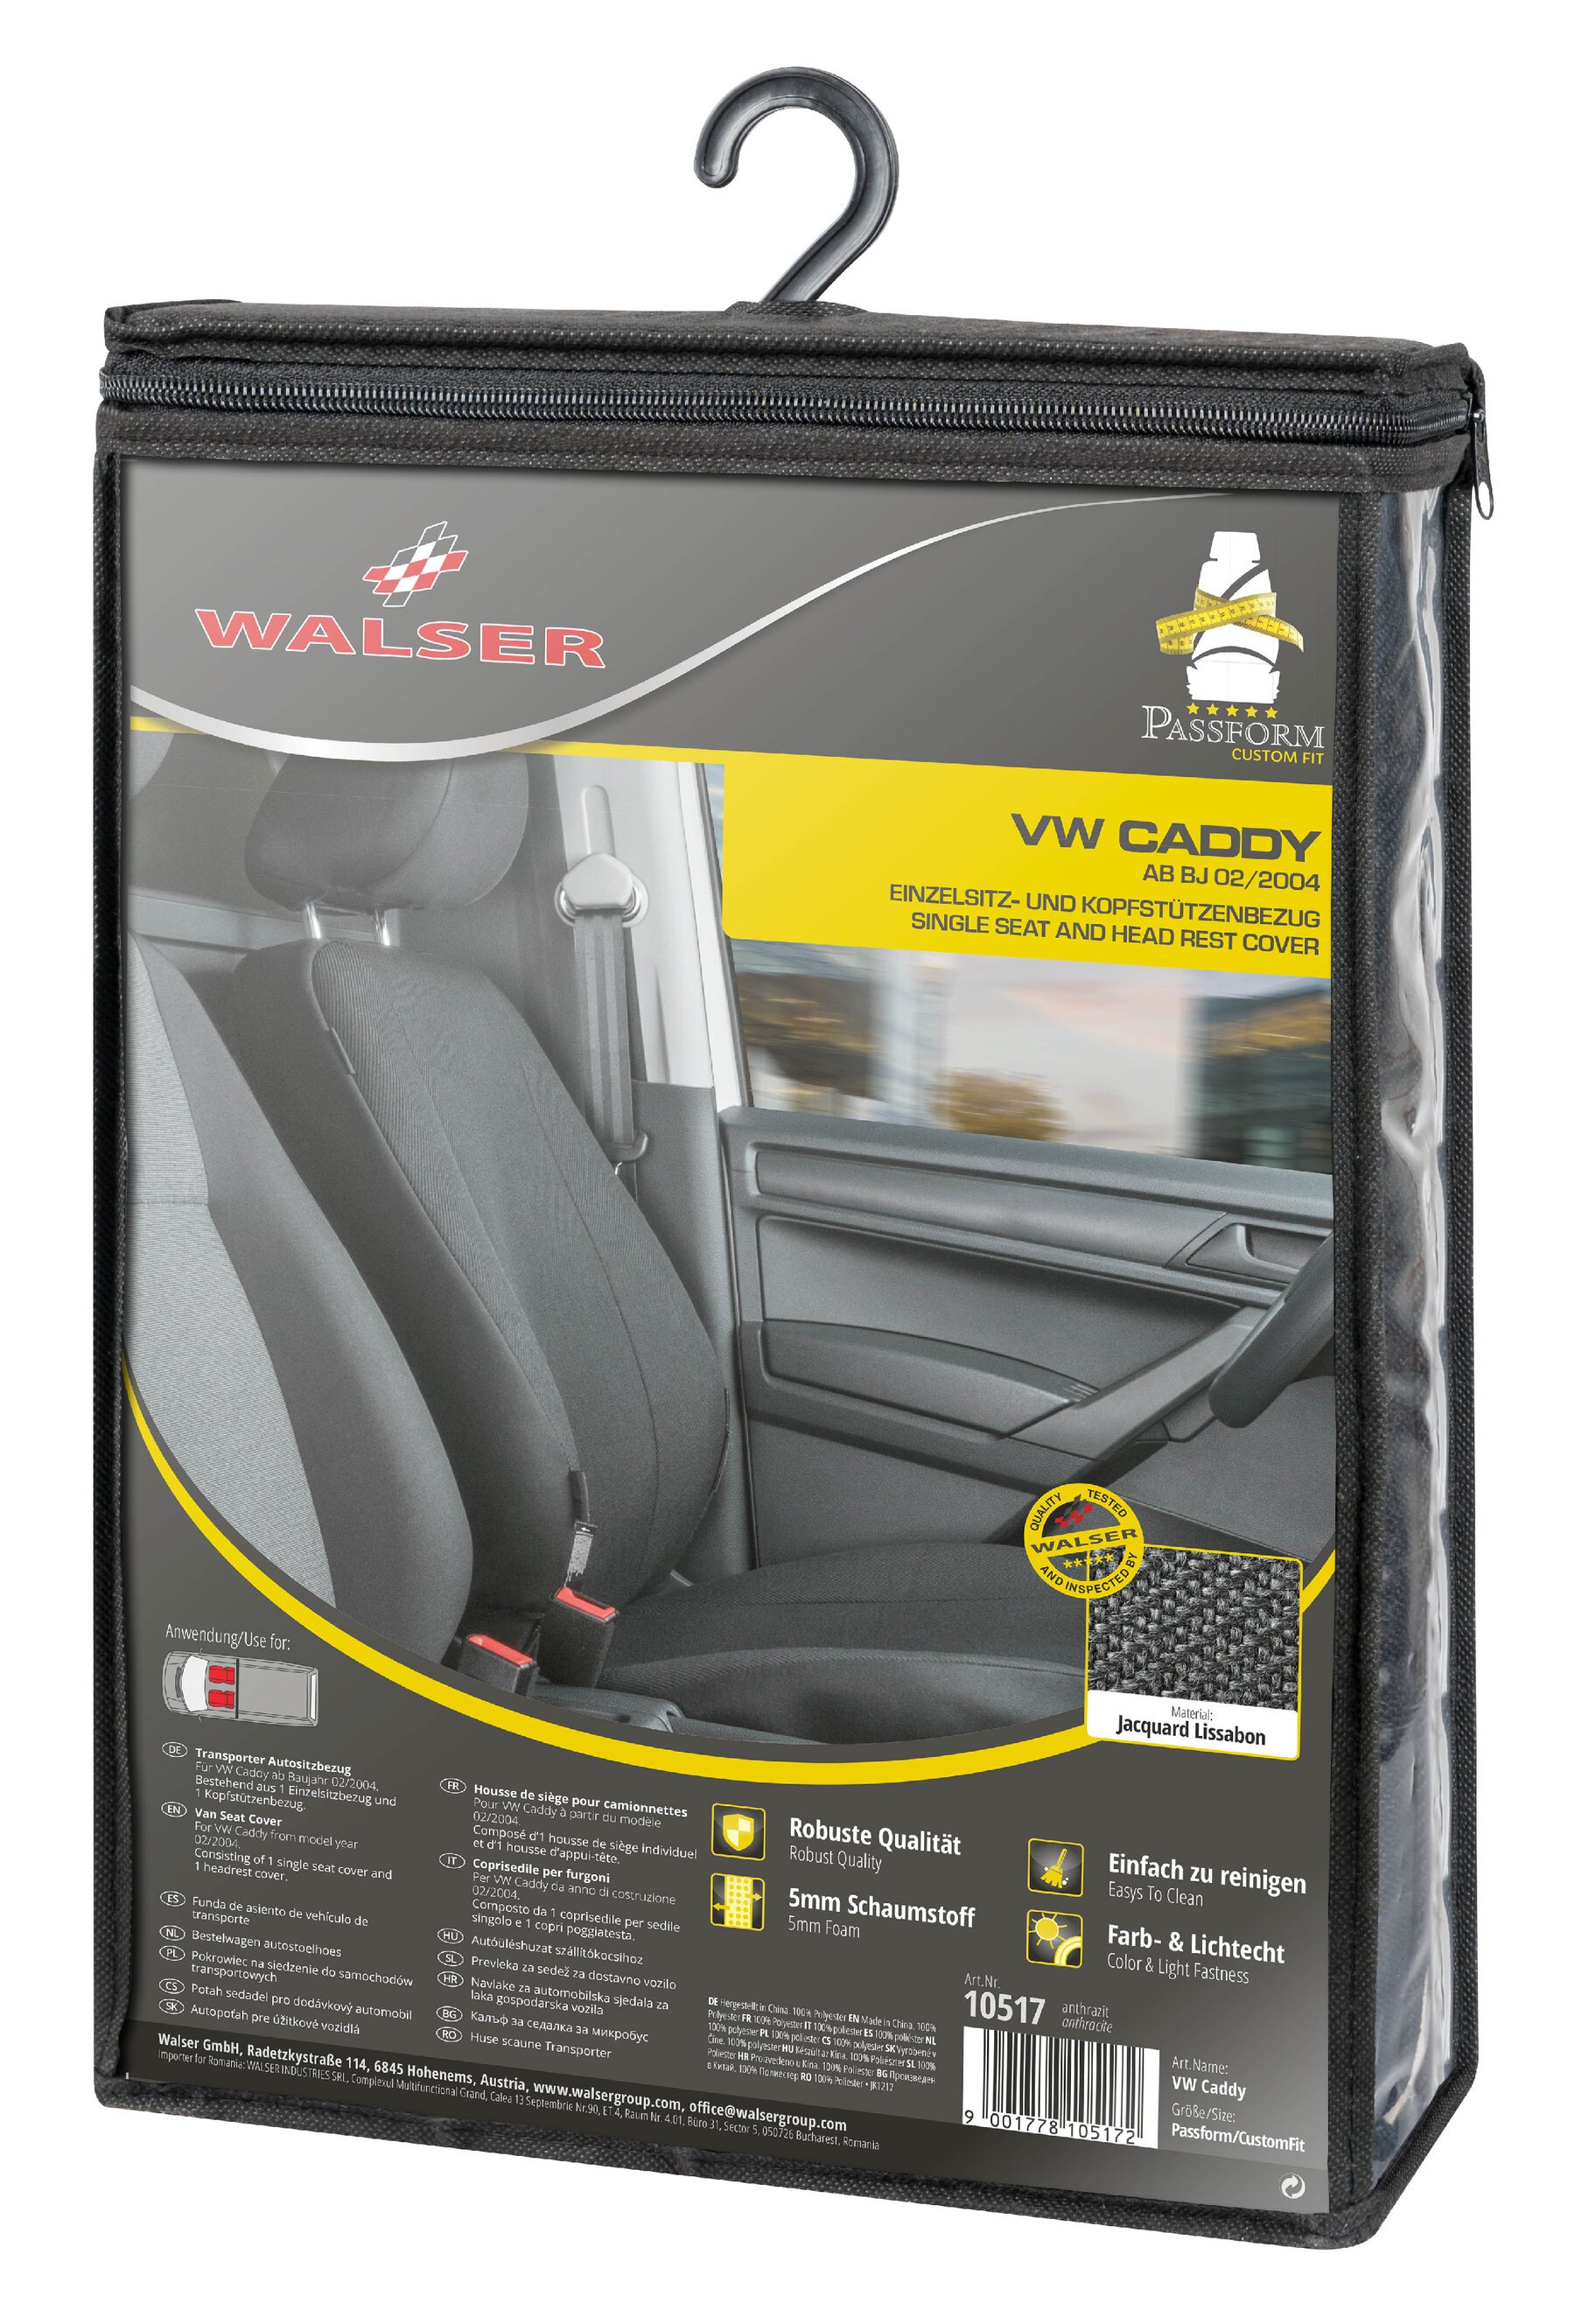 Seat cover made of fabric for VW Caddy, single seat cover front